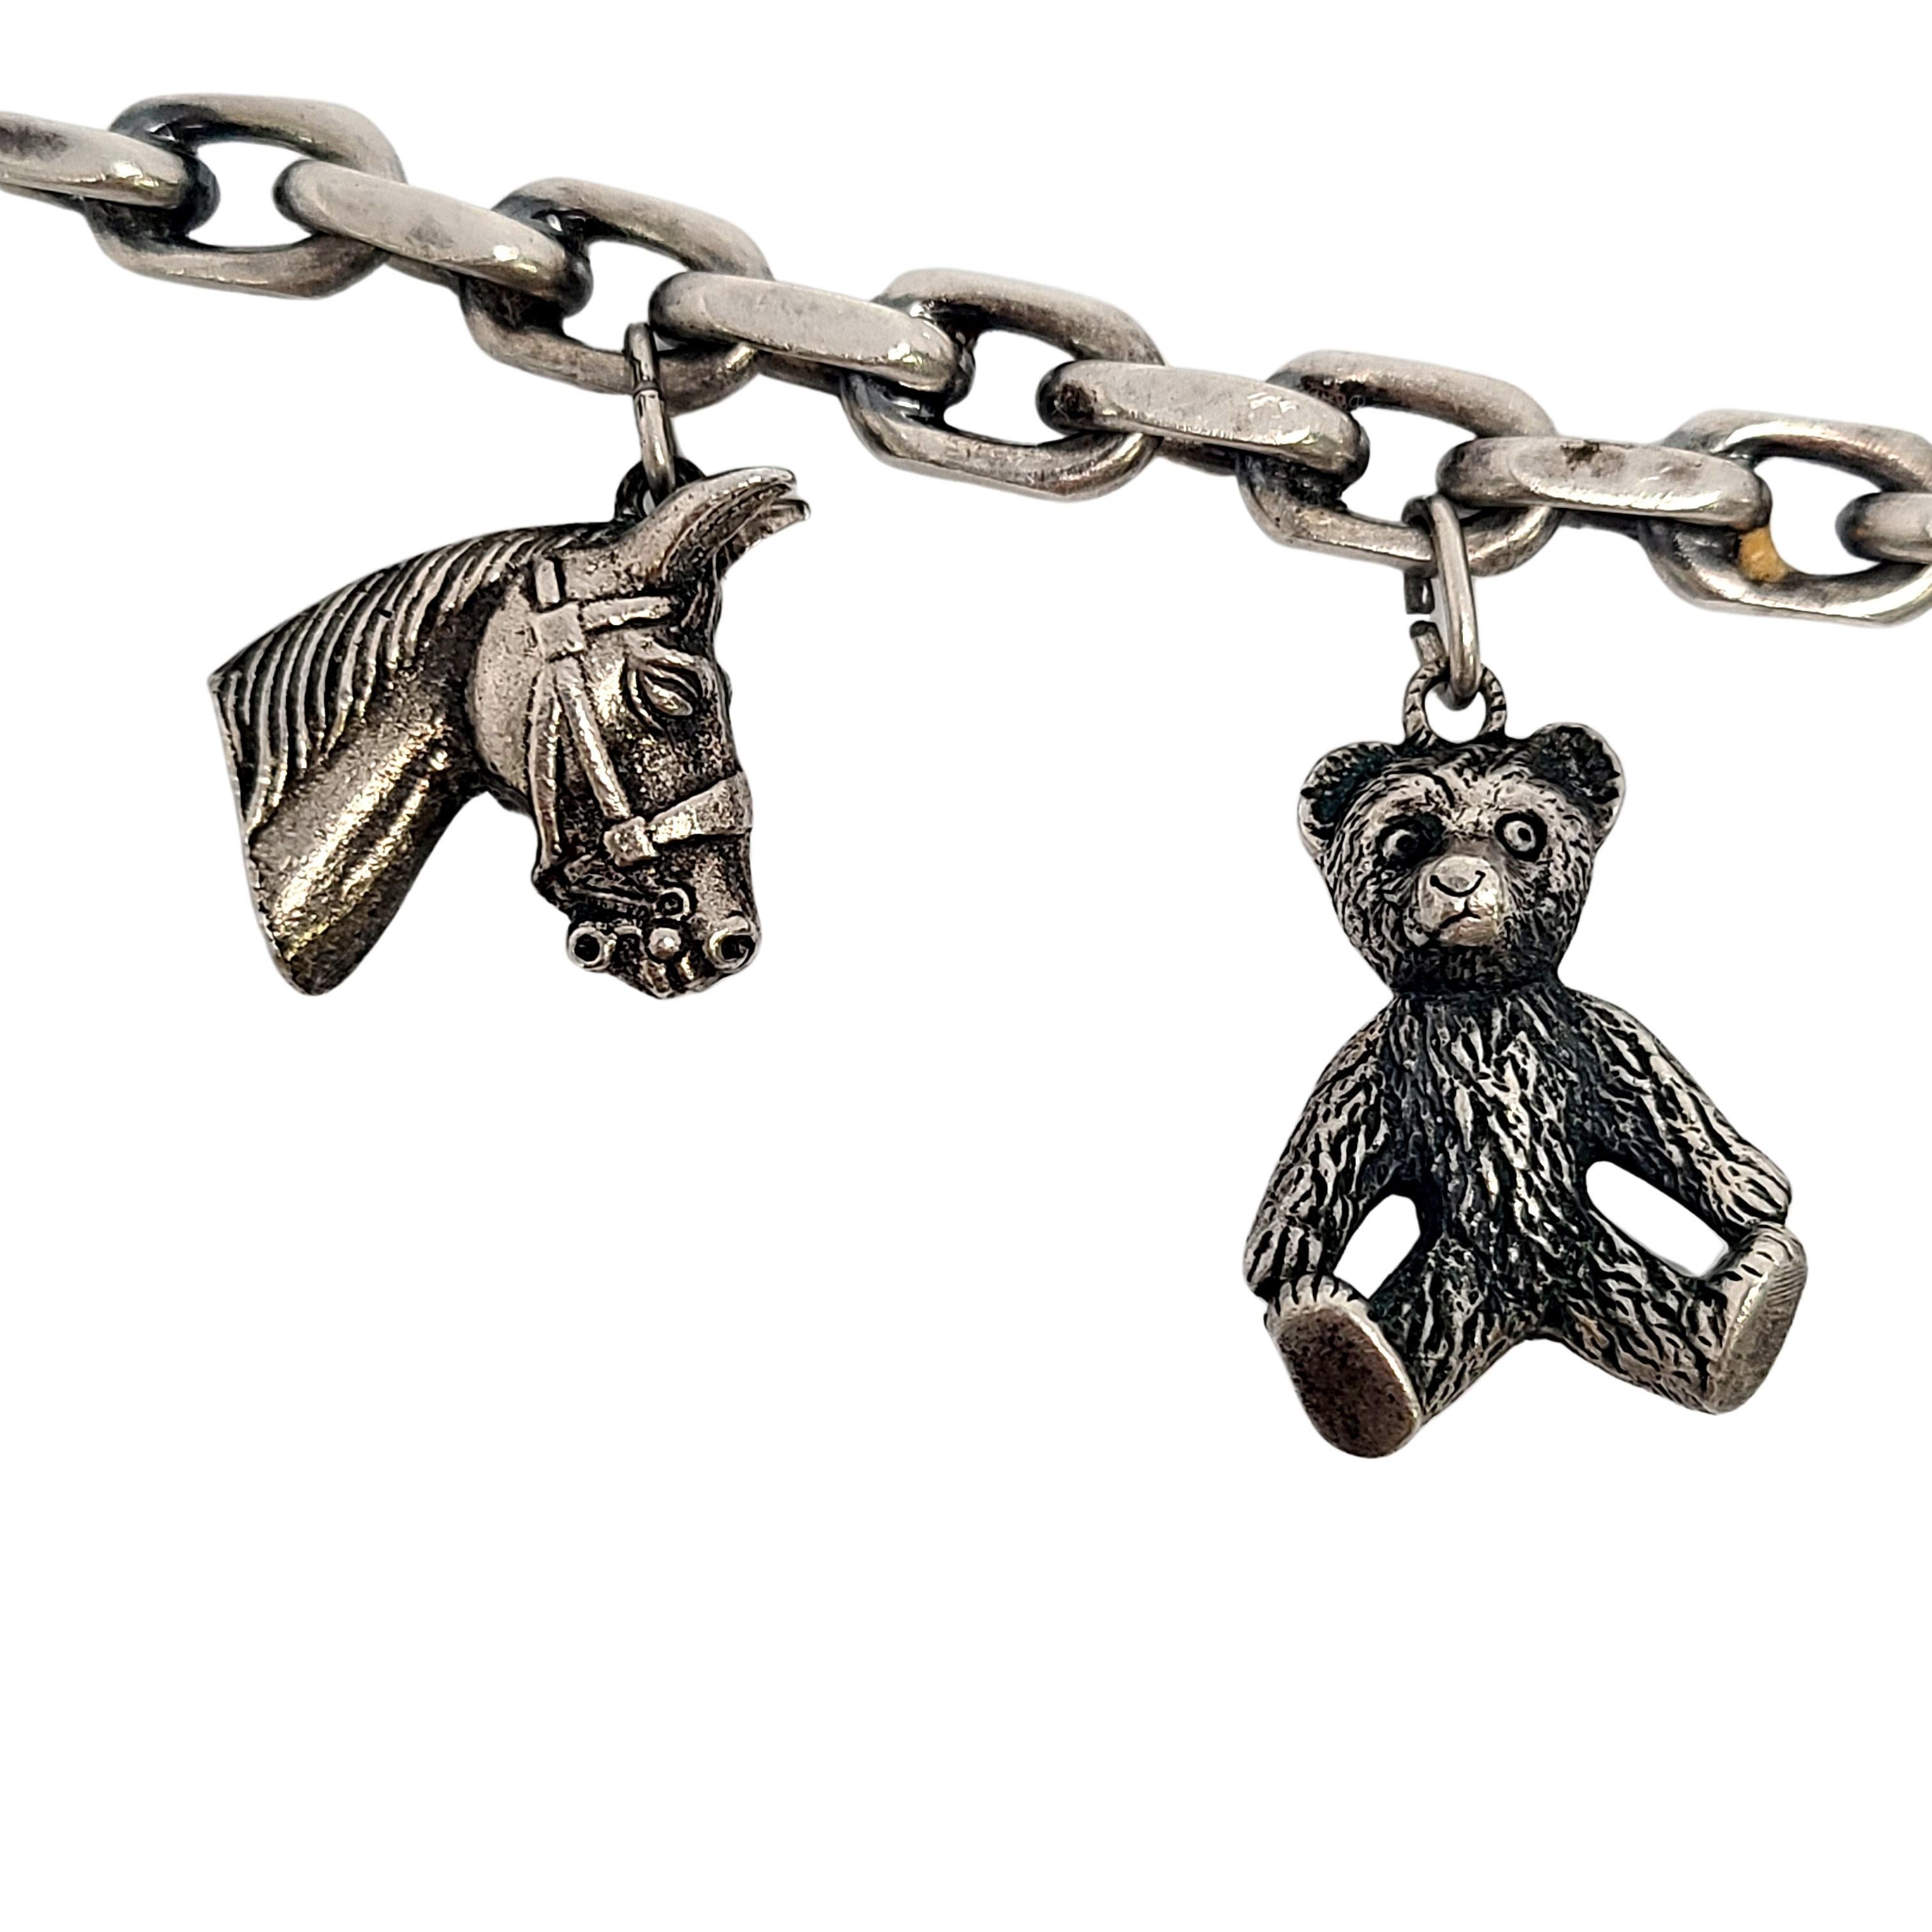 Vintage 800 silver charm bracelet.

Elongated oval link charm bracelet featuring 6 animal charms: horse head, teddy bear, swan, owl, monkey, and a piggy bank with a coin.

Measures approx 6 1/2